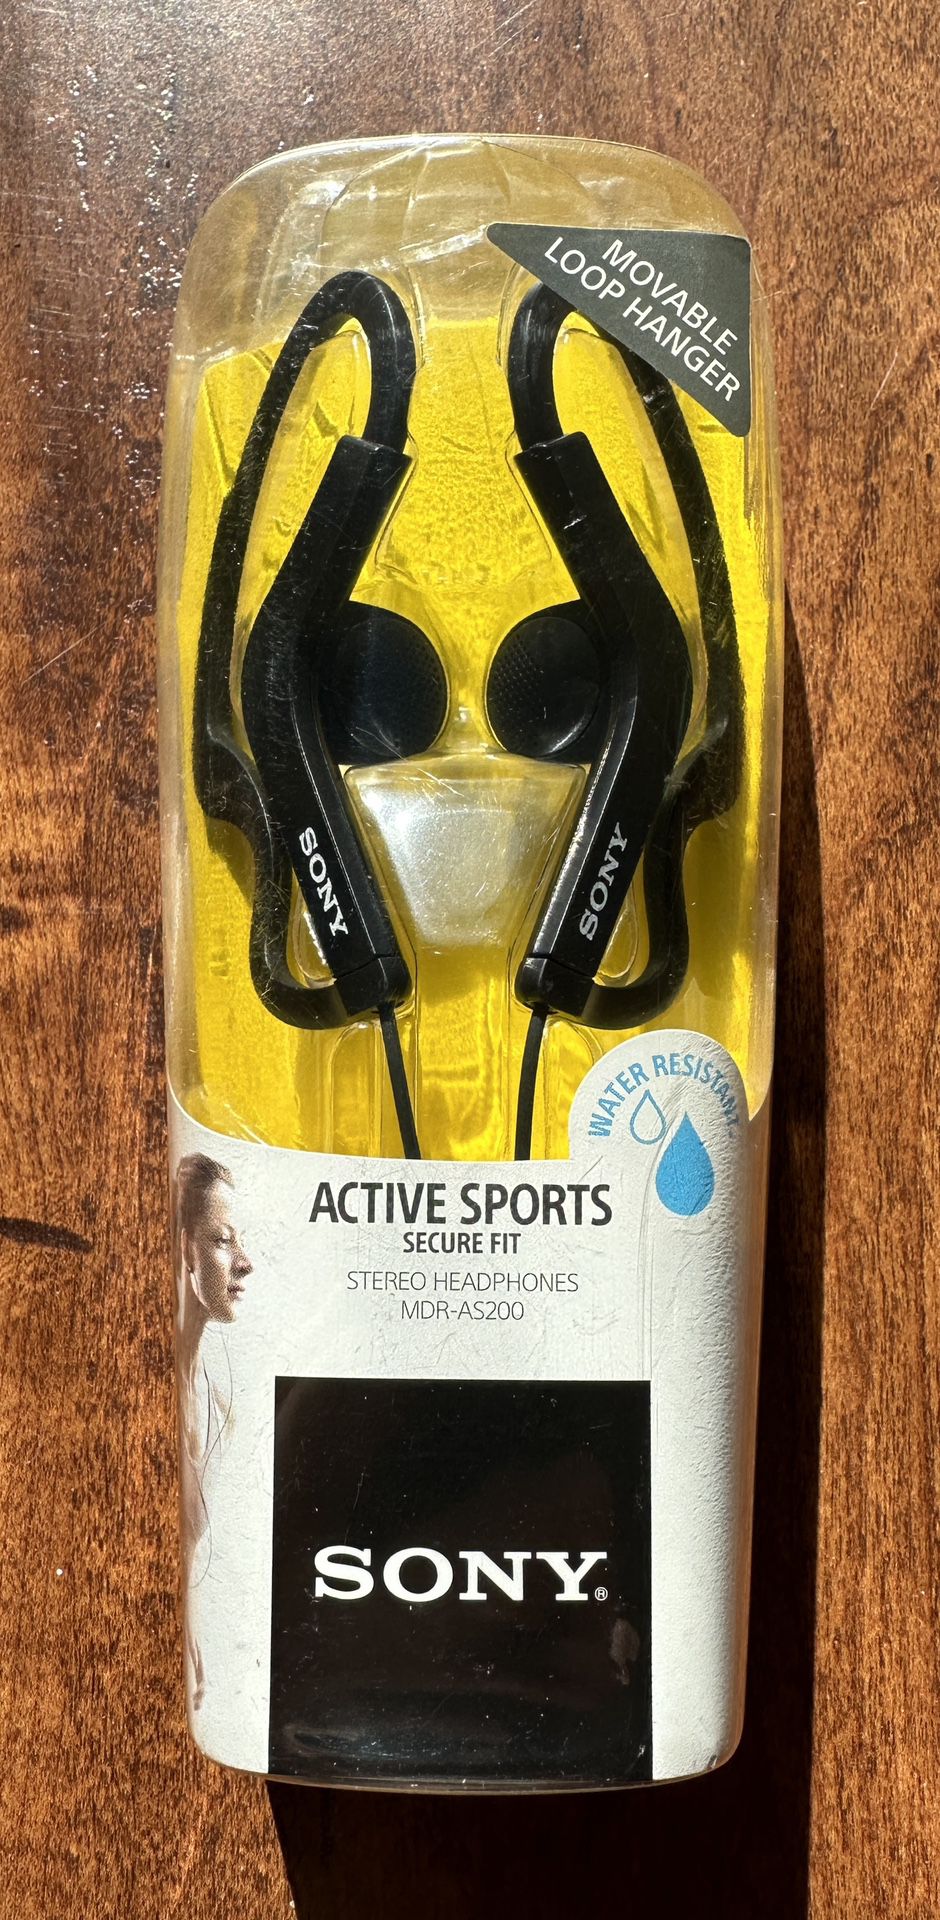 Sony Active Sports Secure Fit Stereo Headphones 